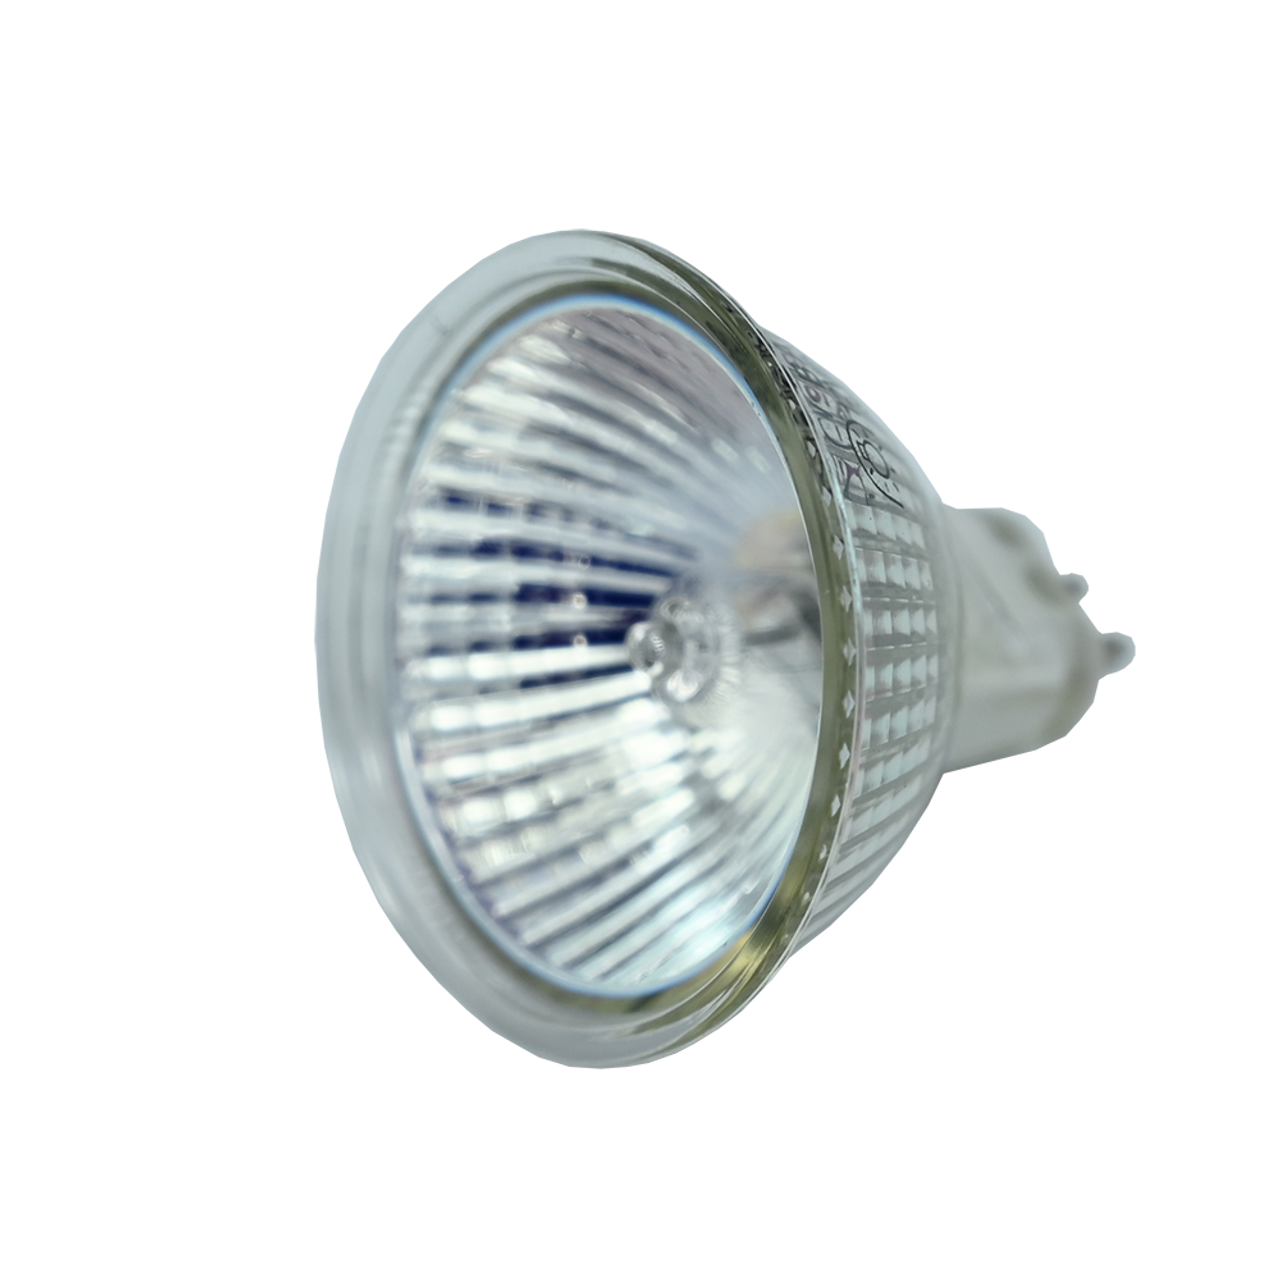 124-01 Replacement LED Bulb